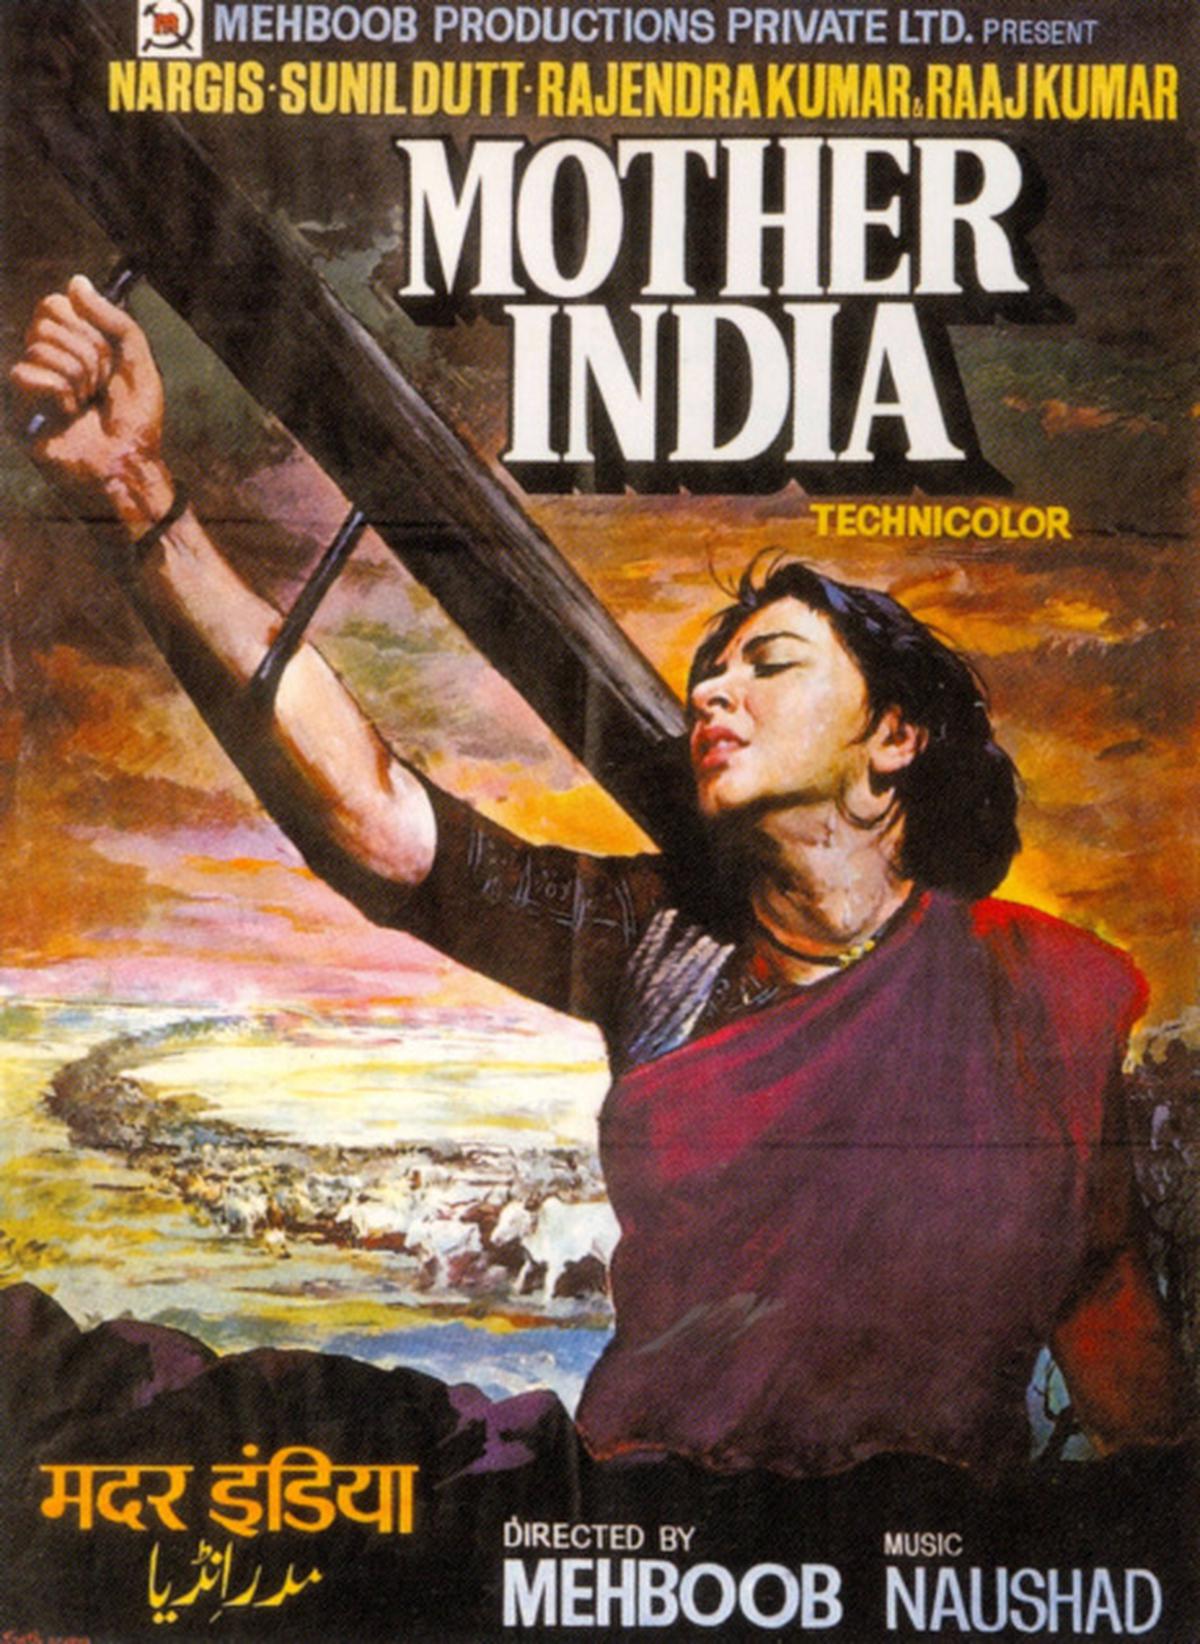 08DFR_MOTHER_INDIA01